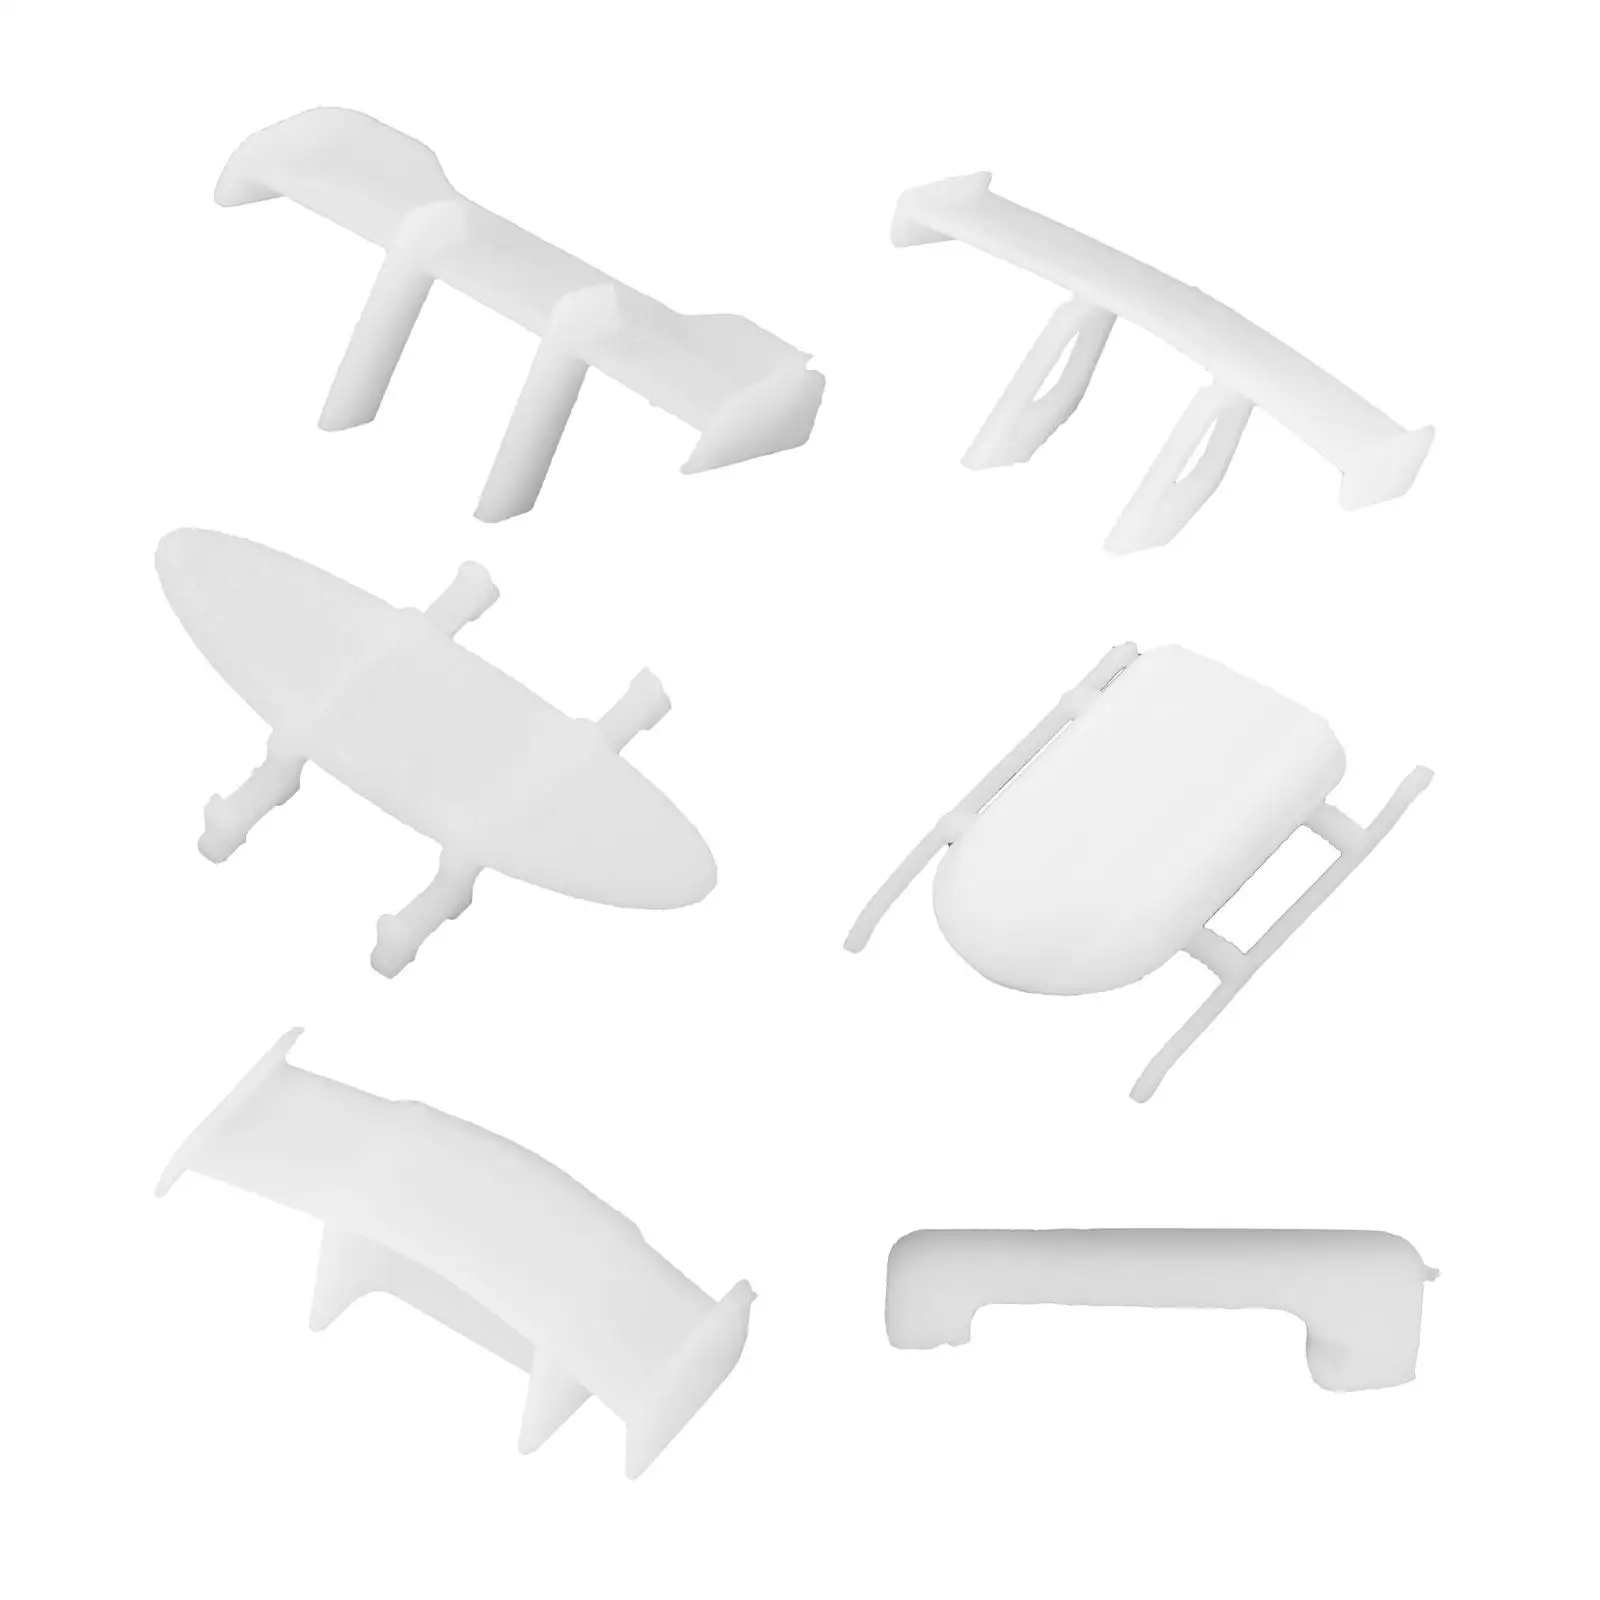 Plastic 1:64 Scale Alloy Model Car Spoiler Tail Wing Luggage Rack Parts DIY Upgrades Accessory easymodel 35123 1 72 scale german e 100 e100 tank destroyer assembled finished military model static plastic collection or gift